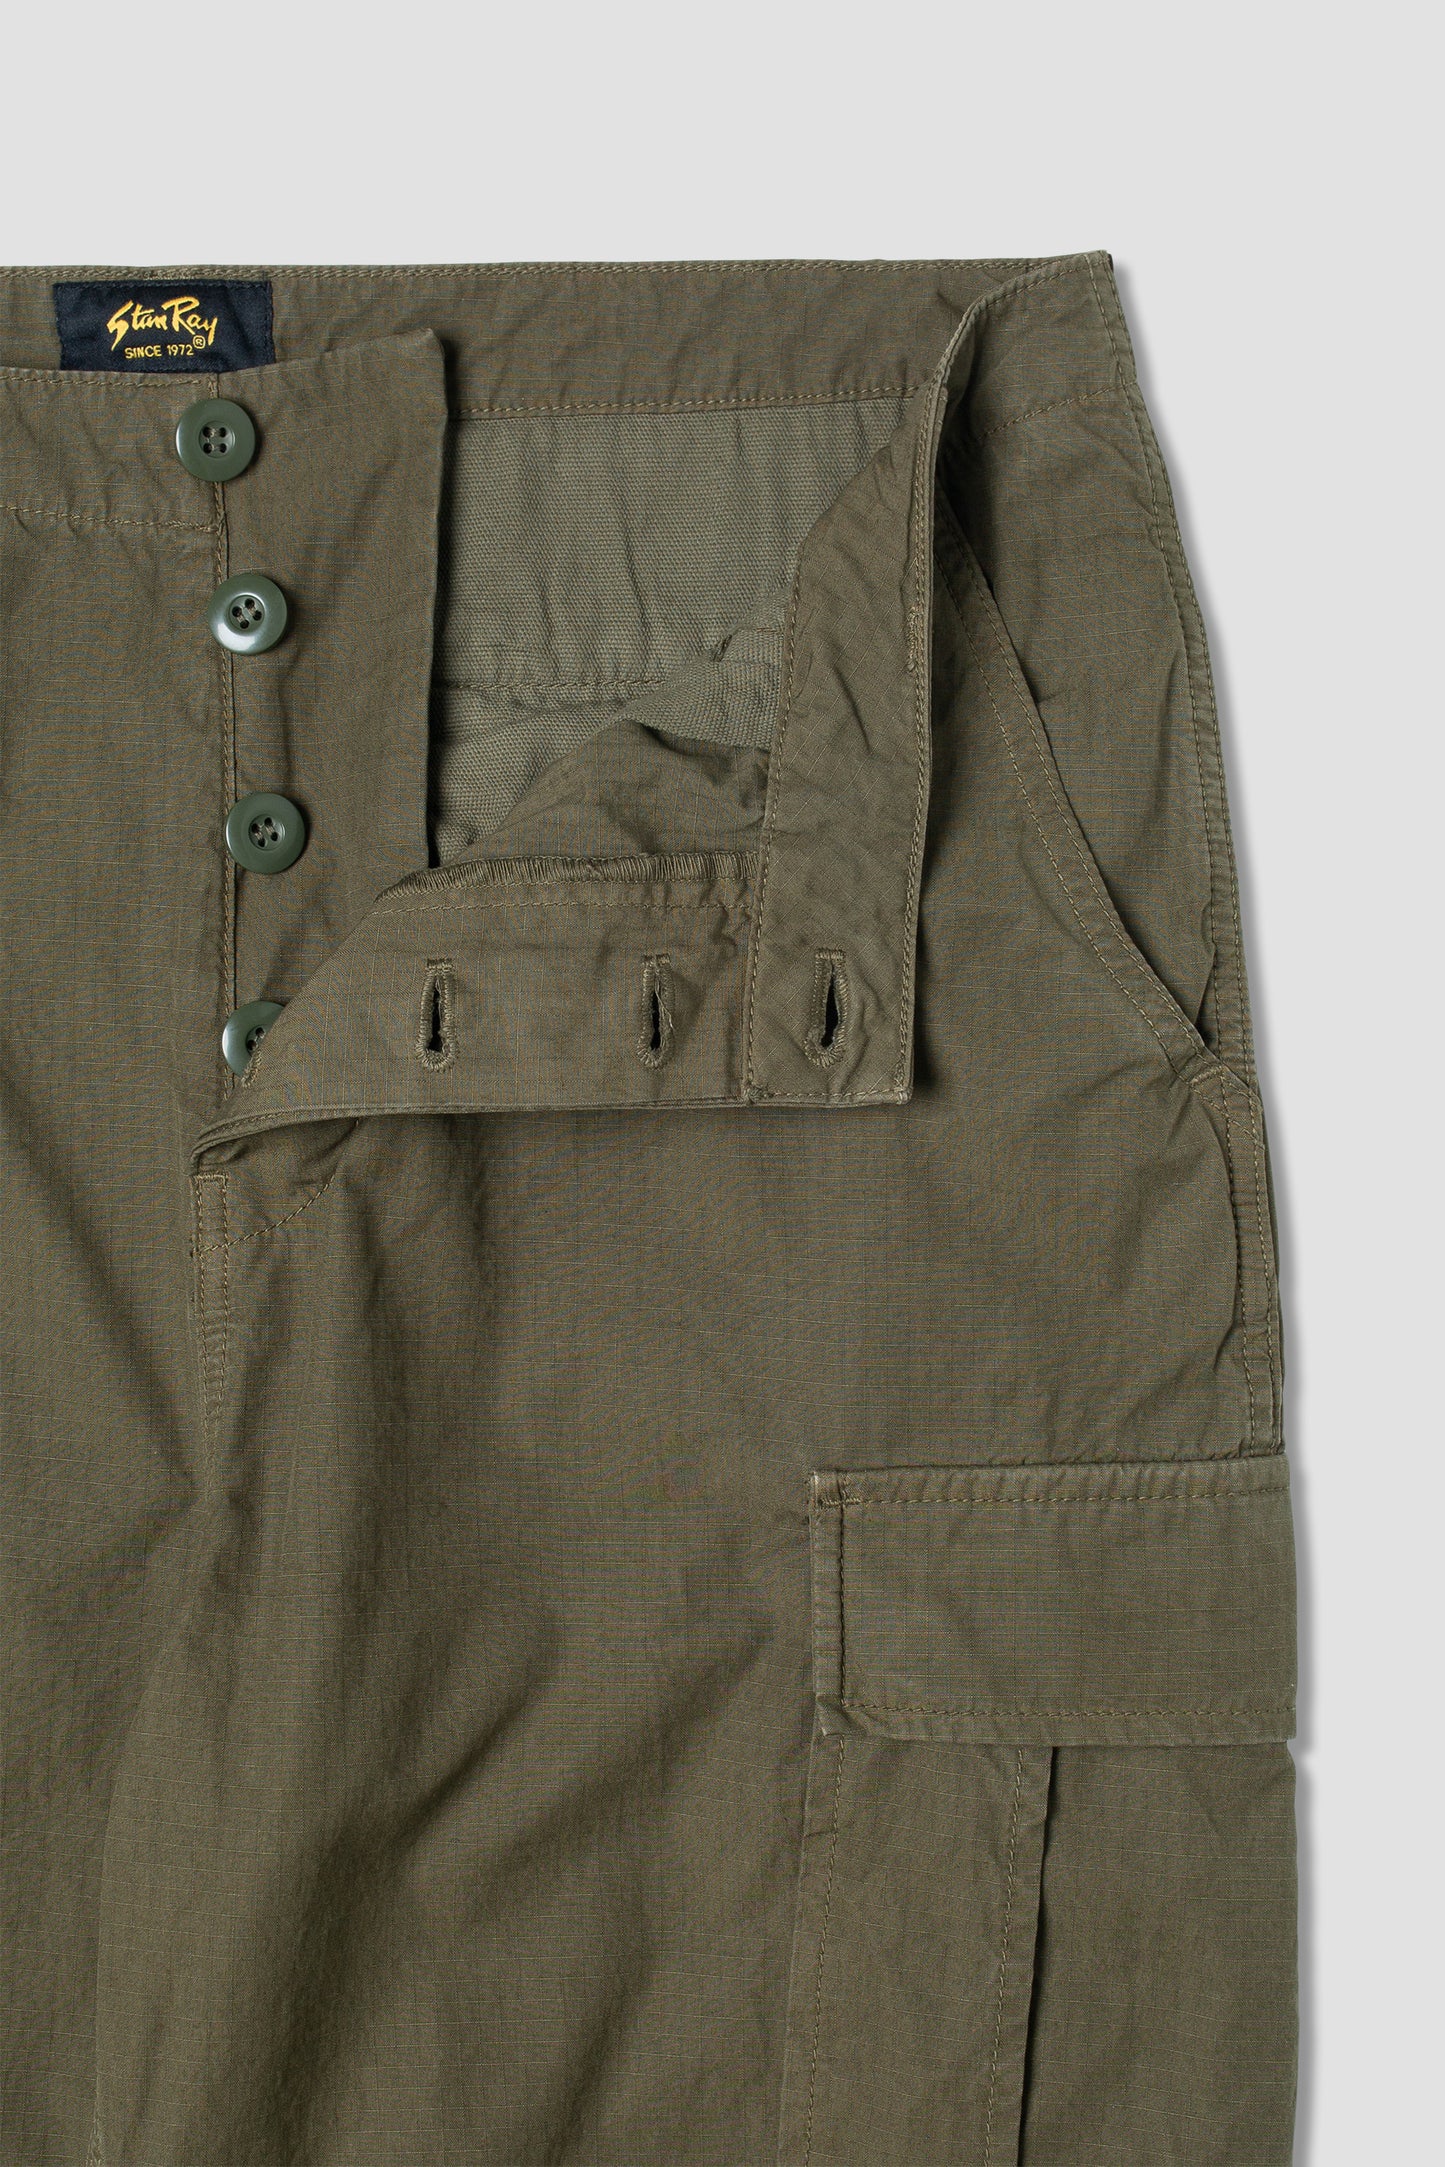 Cargo Pant (Olive Ripstop)